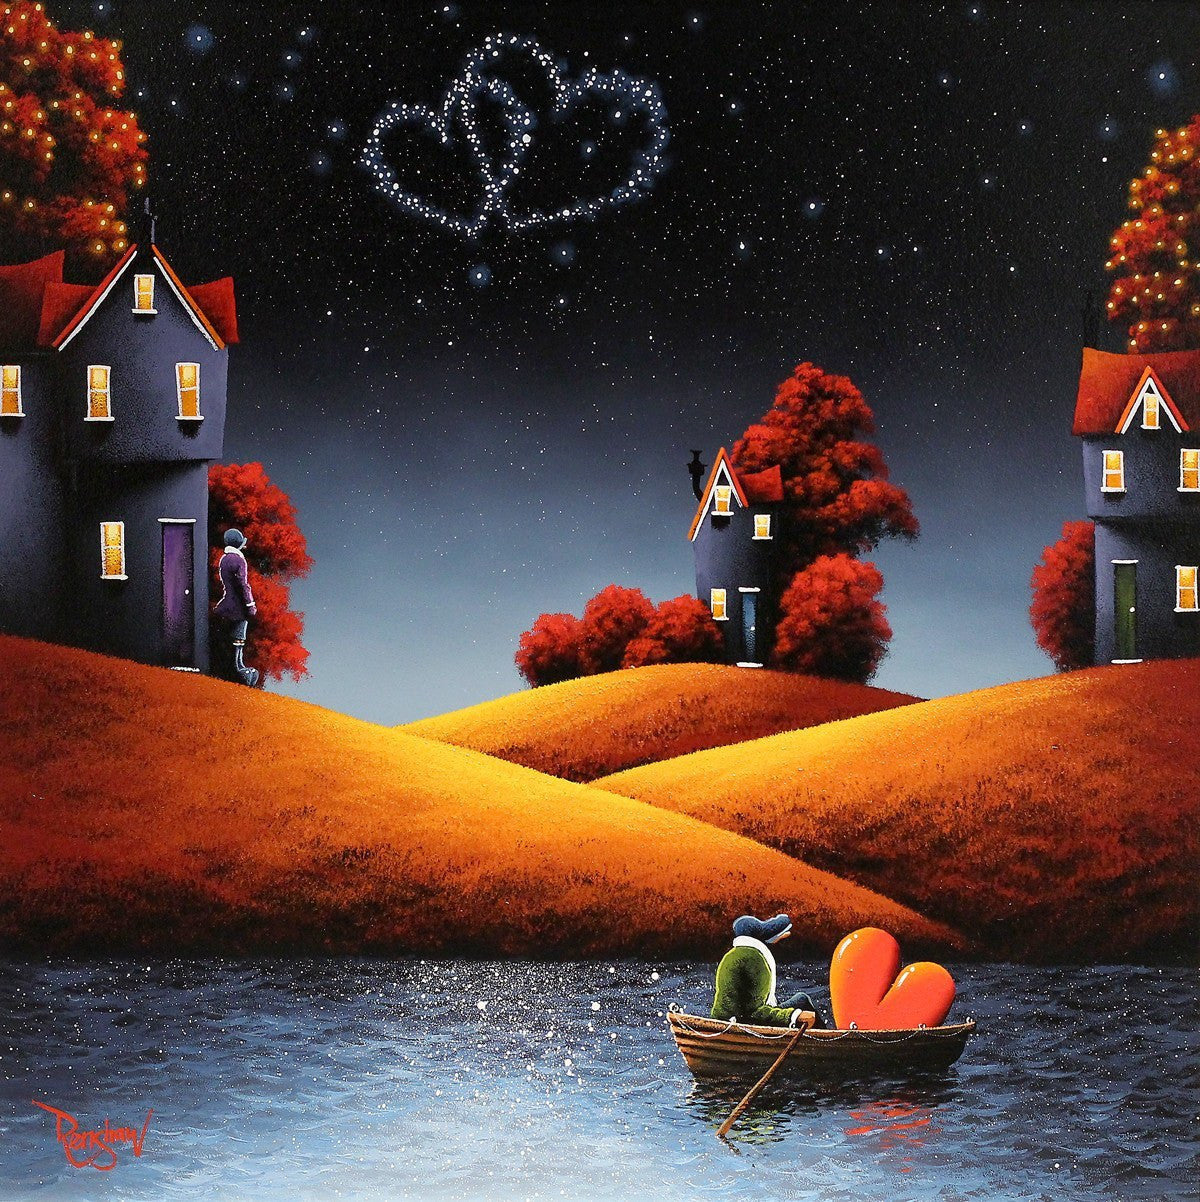 Taking Your Love With Me - SOLD David Renshaw